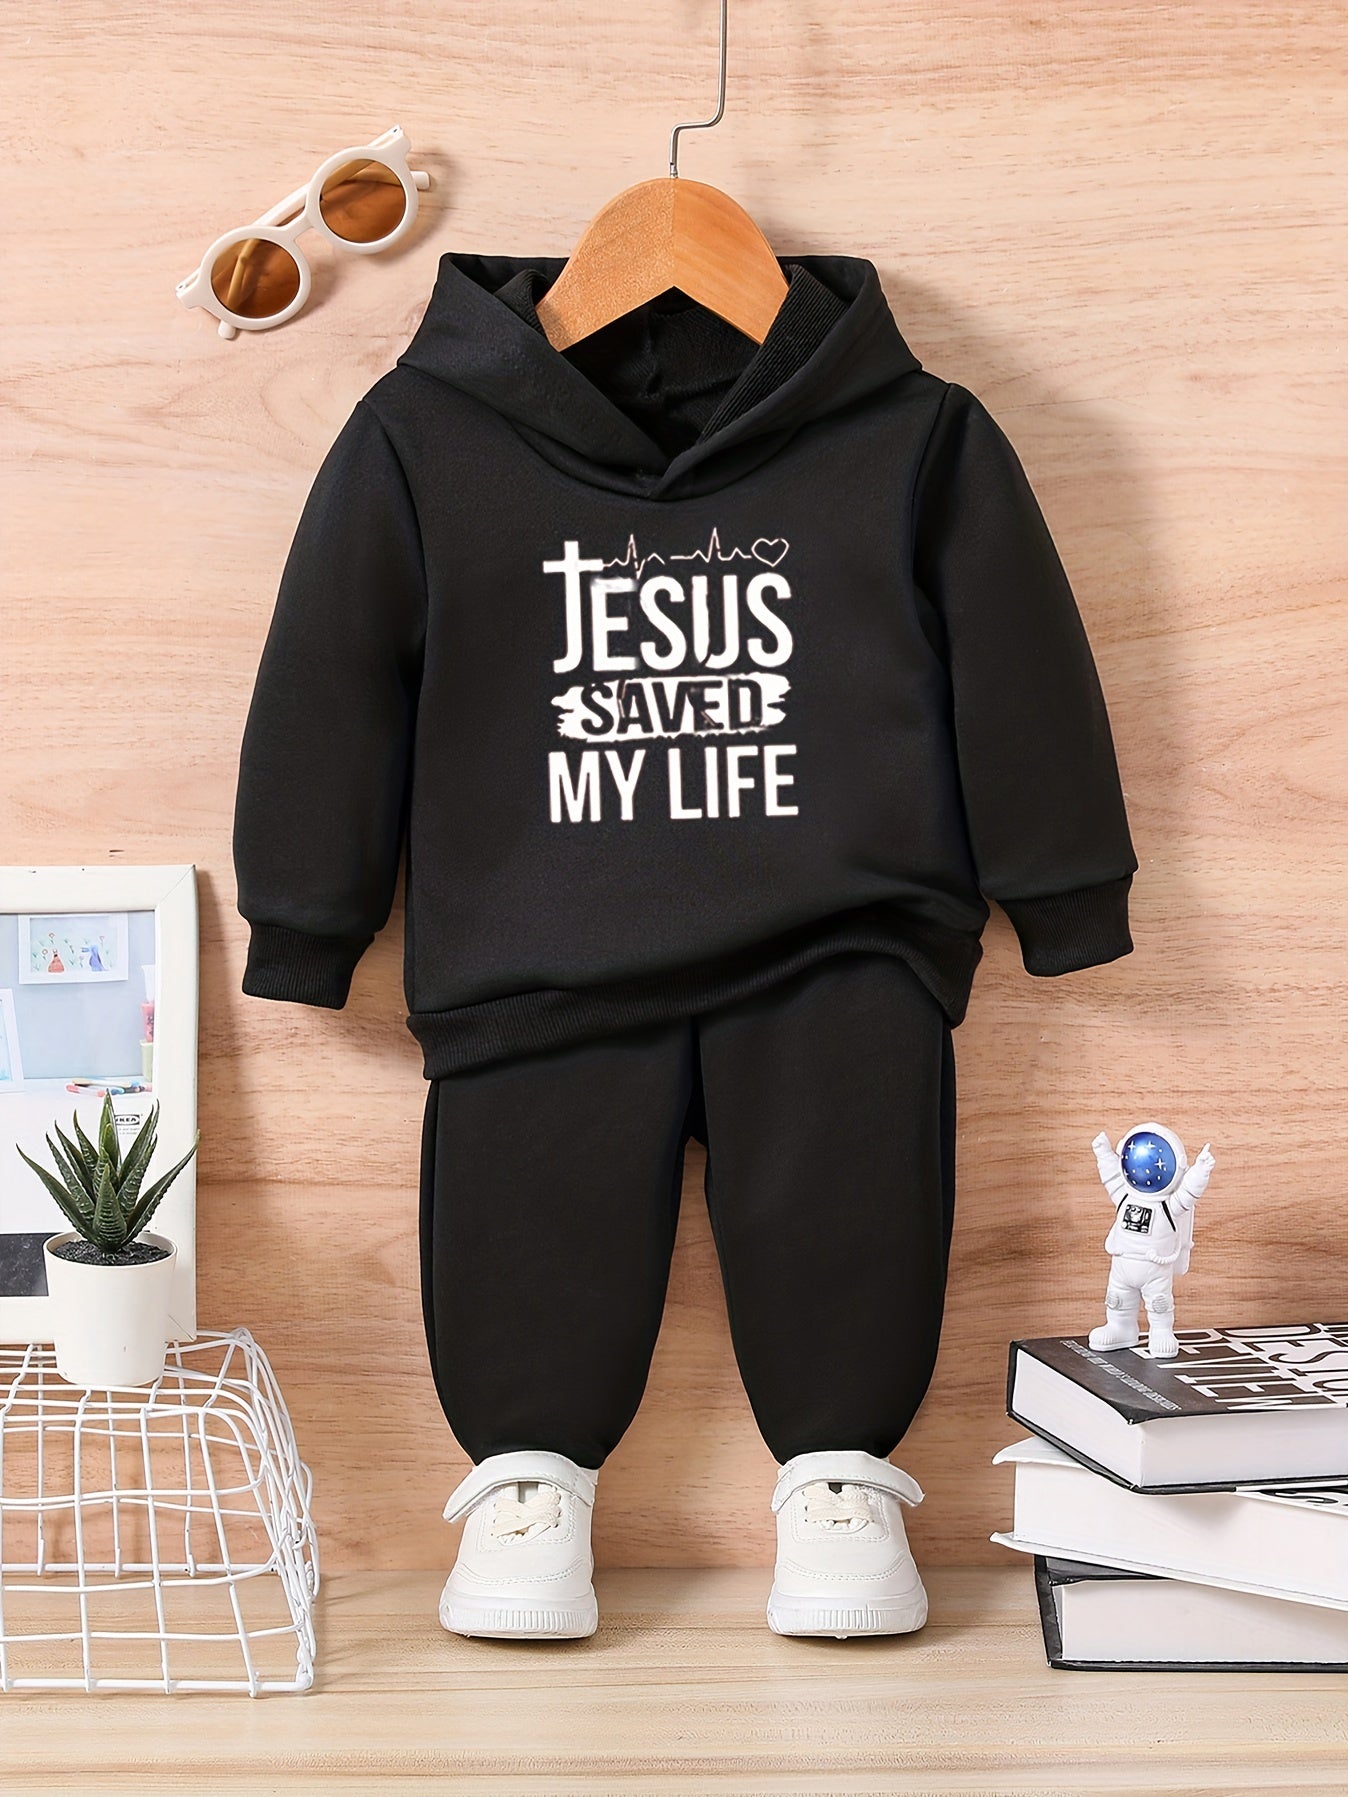 Jesus Saved My Life Toddler Christian Casual Outfit claimedbygoddesigns